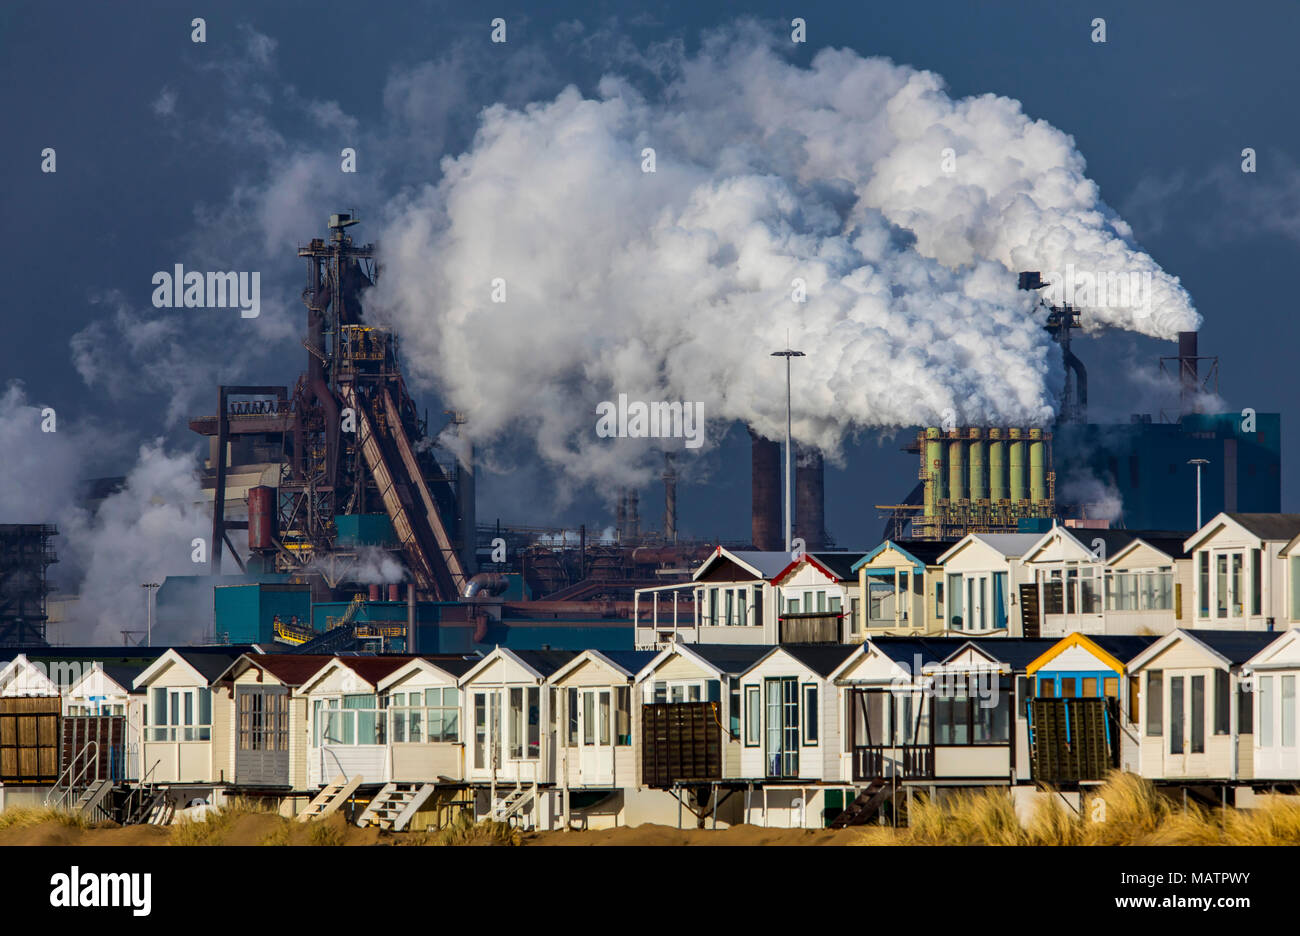 The Tata Steel steelworks in IJmuiden, Velsen, North Holland, Netherlands, largest industrial area in the Netherlands, 2 blast furnaces, 2 coking plan Stock Photo